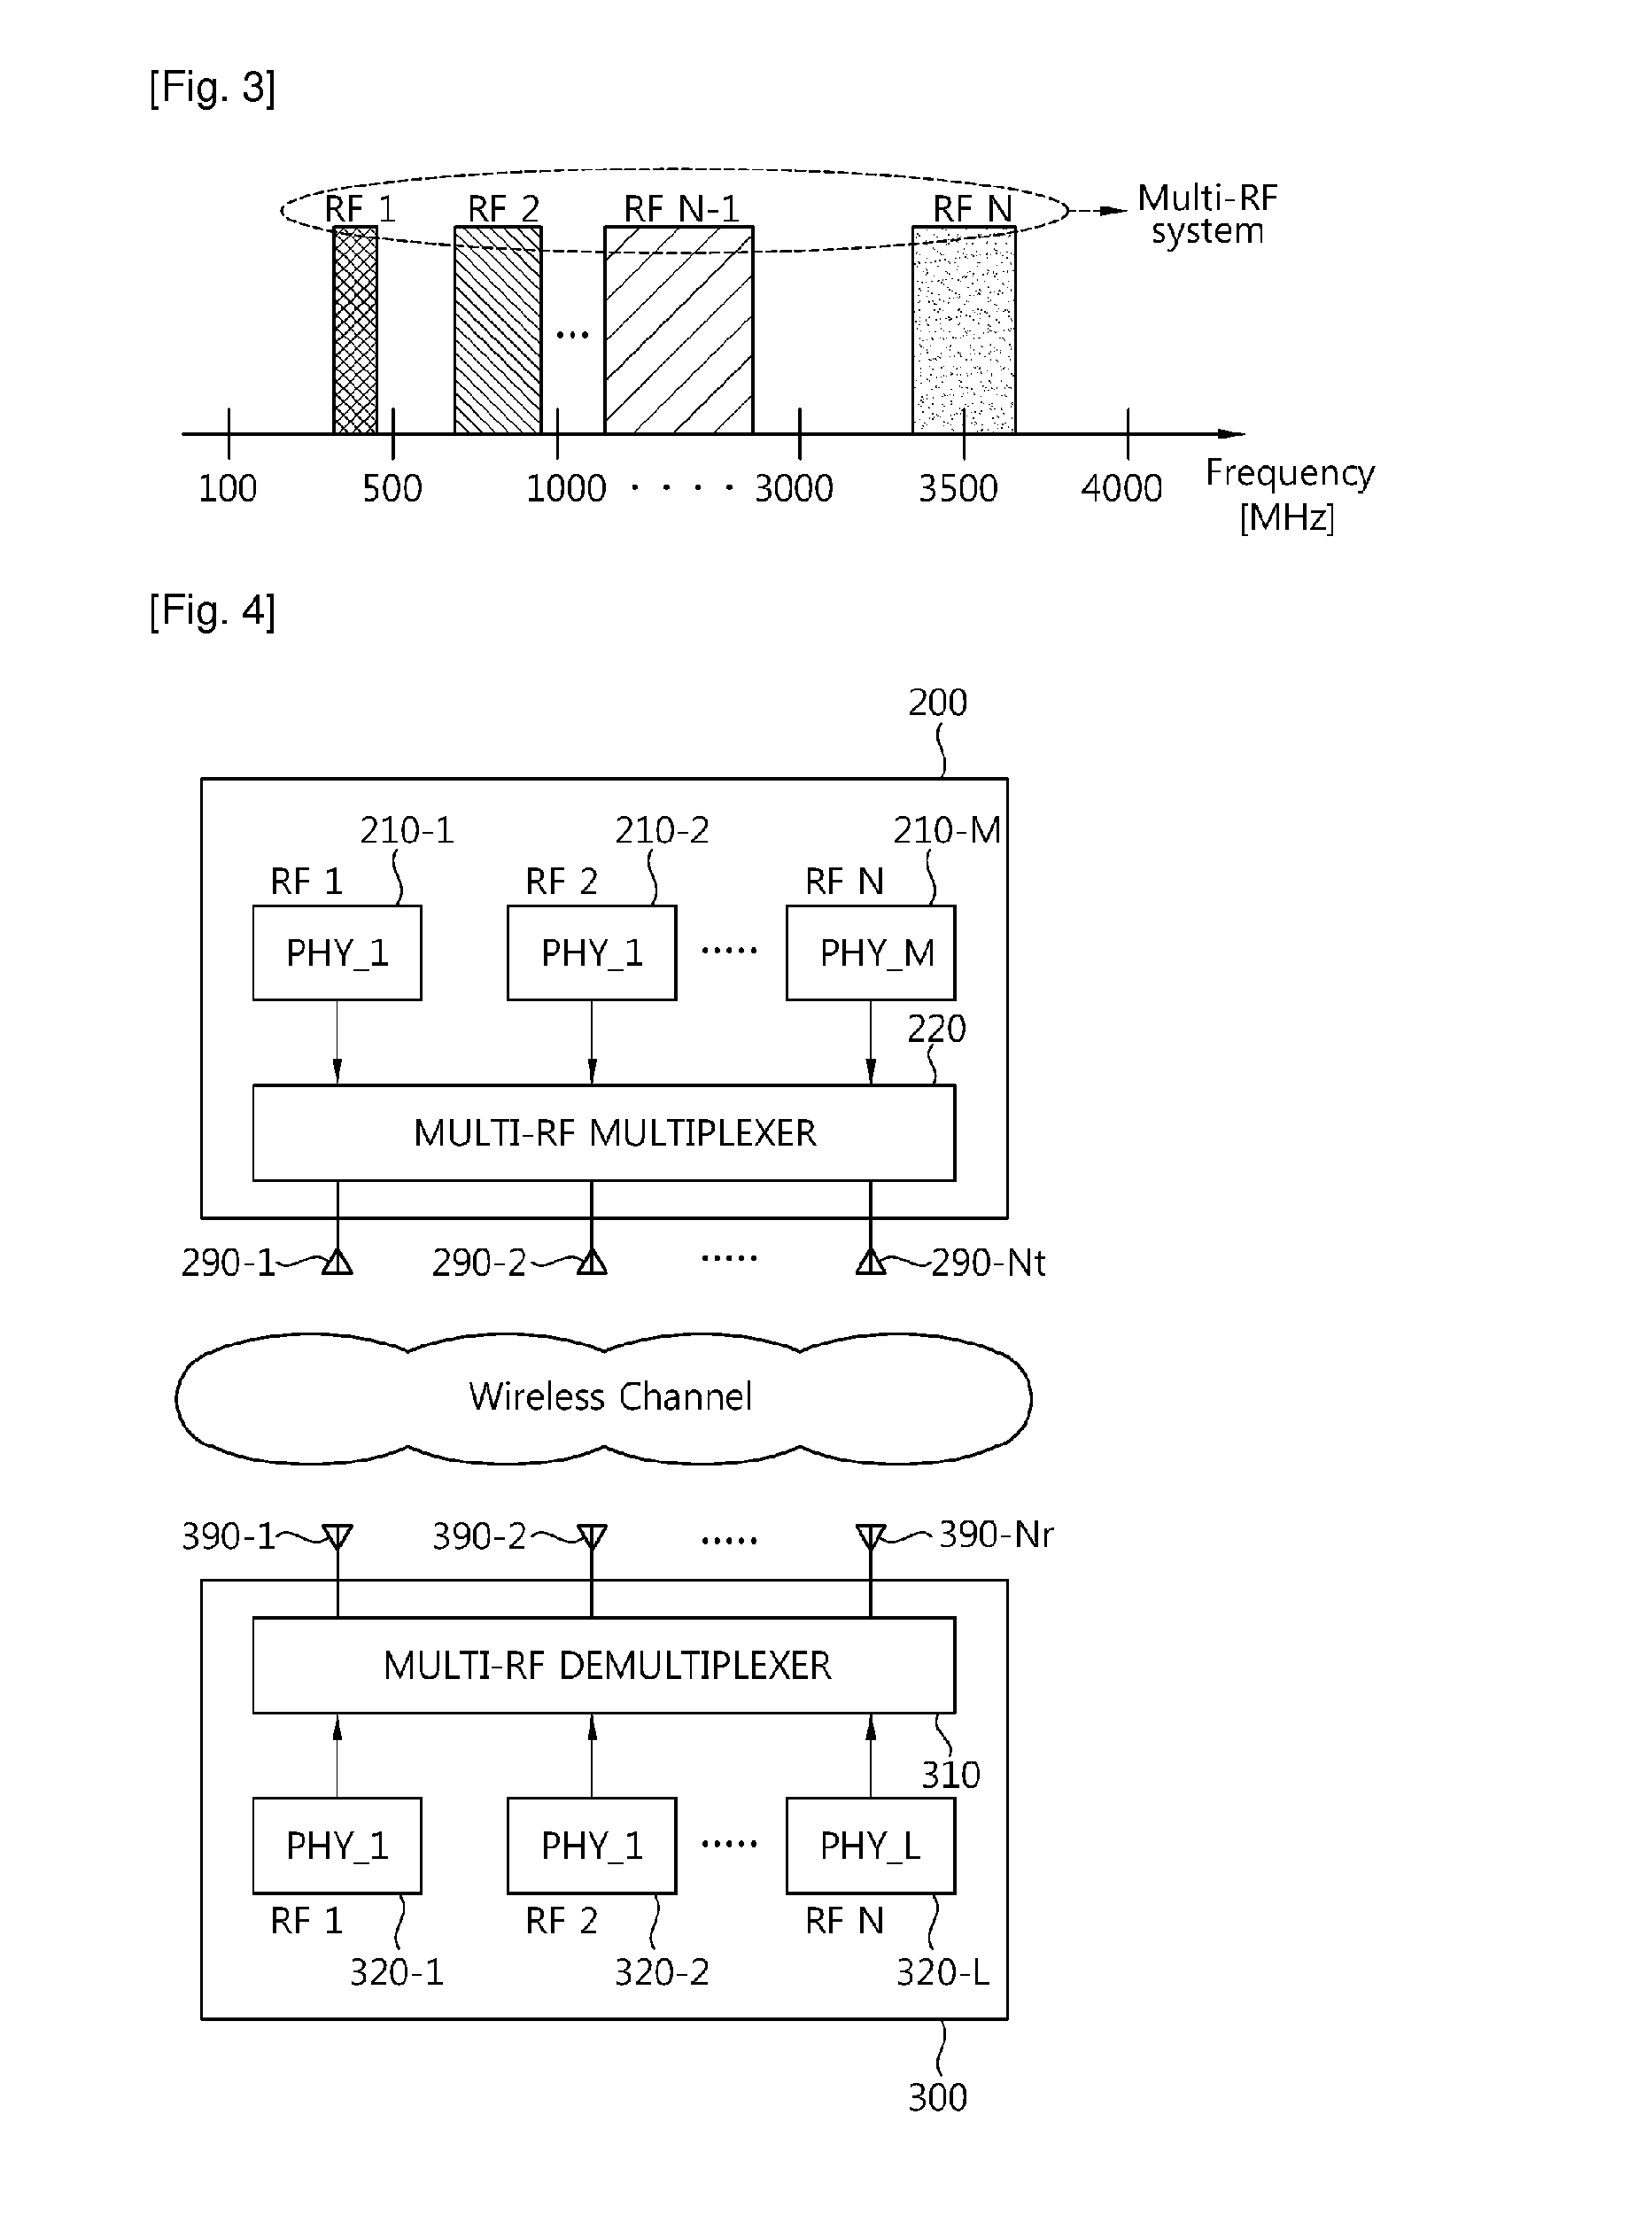 Method and apparatus of transmitting data in multiple RF system